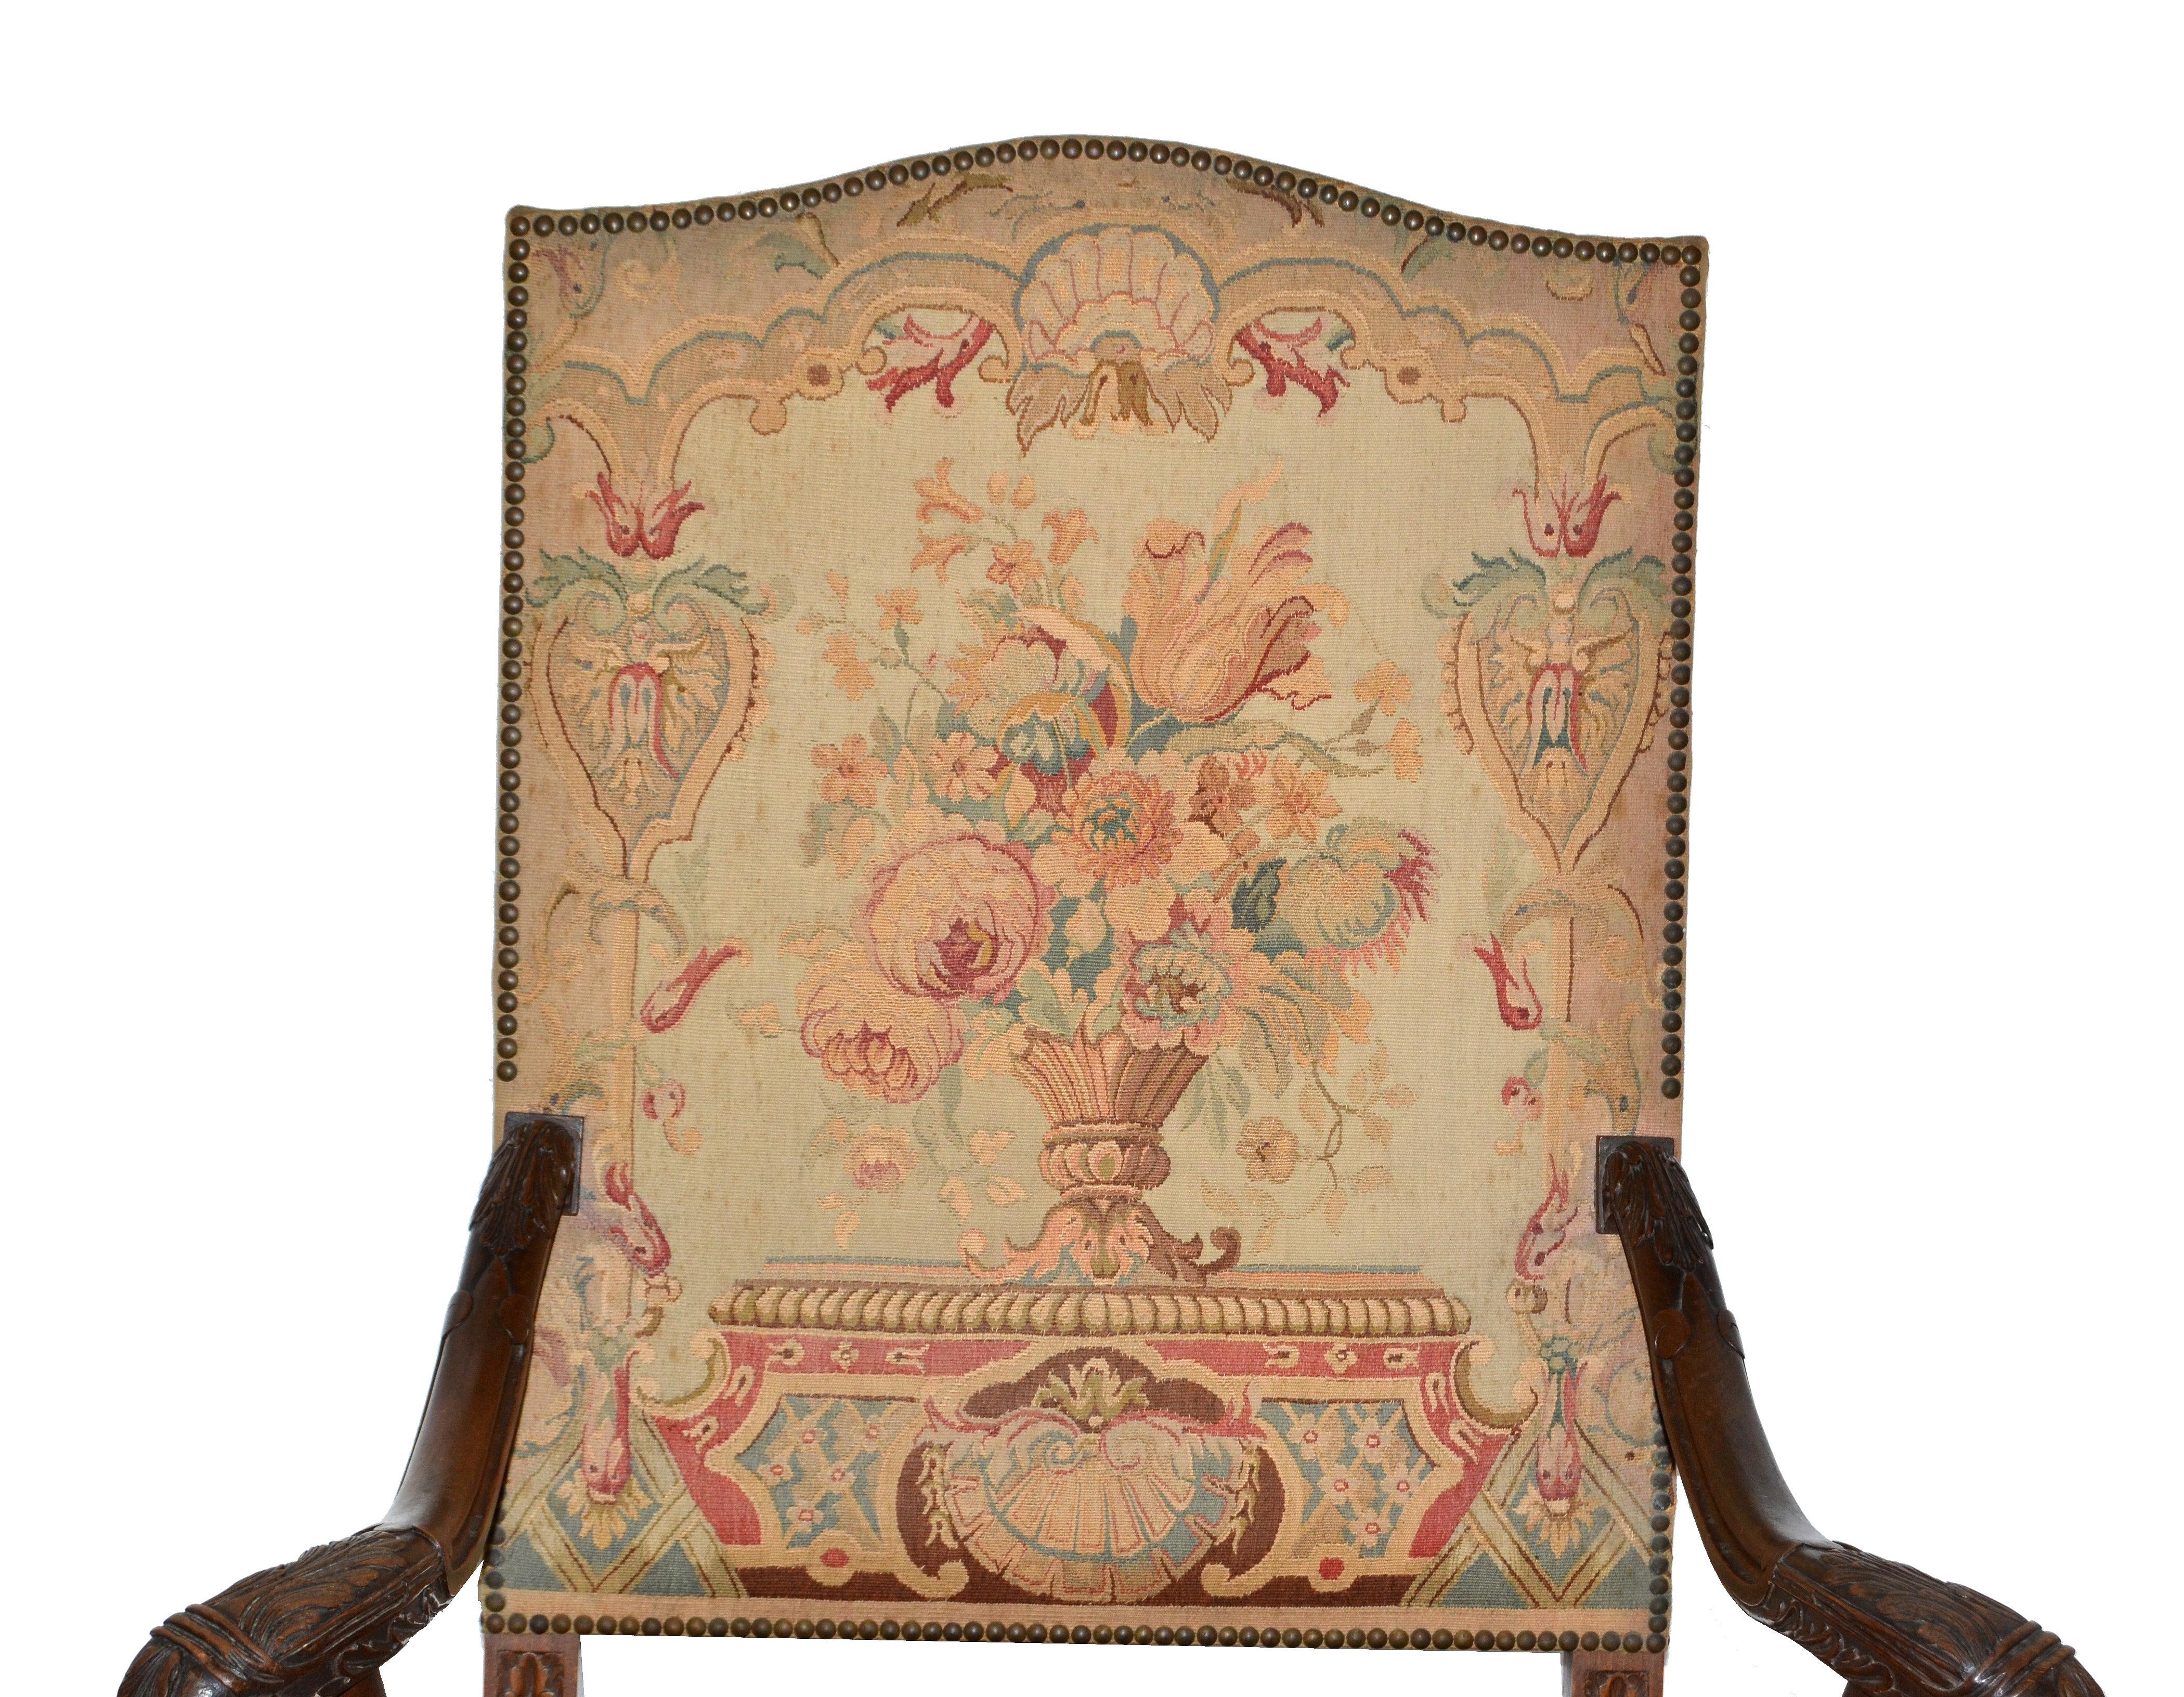 Hand-Carved 17th Century Hand Carved Walnut Wood Armchair Needlepoint Upholstery Cross Base For Sale